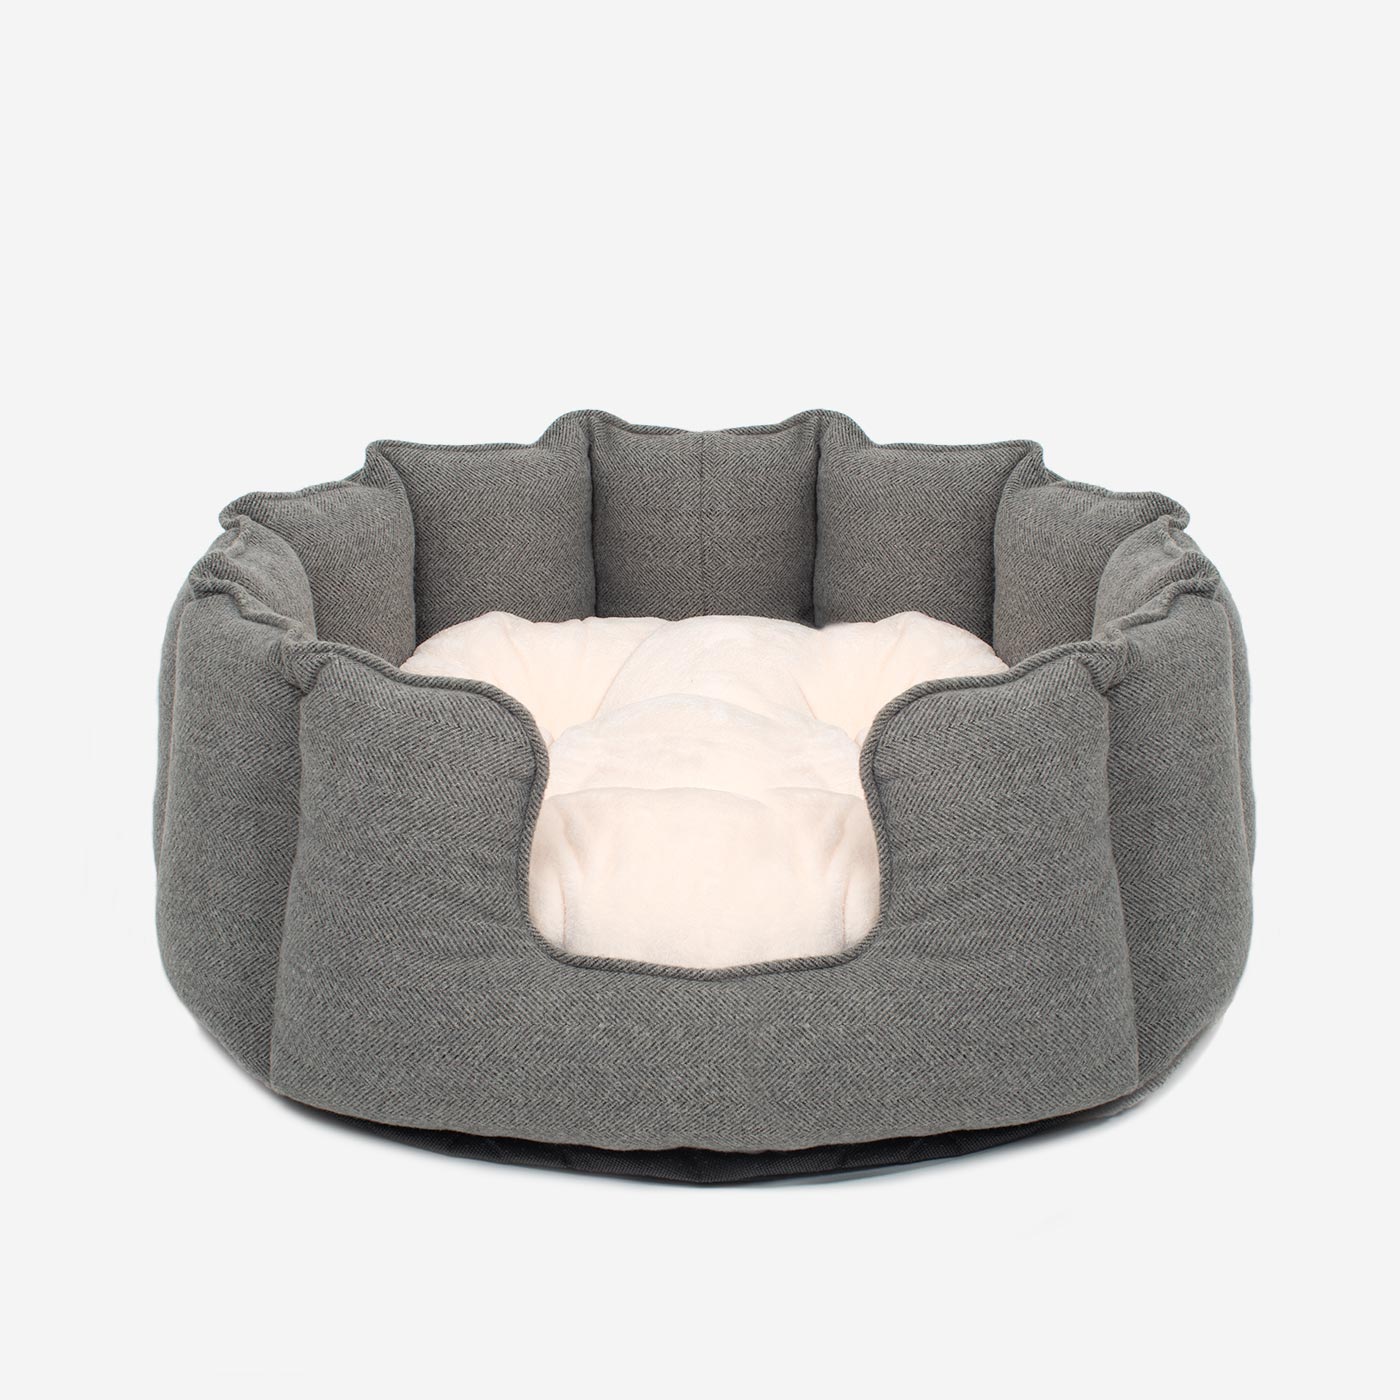 Discover Our Luxurious High Wall Bed For Cats, Featuring inner pillow with plush teddy fleece on one side To Craft The Perfect Cat Bed In Stunning Pewter Herringbone Tweed! Available To Personalize Now at Lords & Labradors US